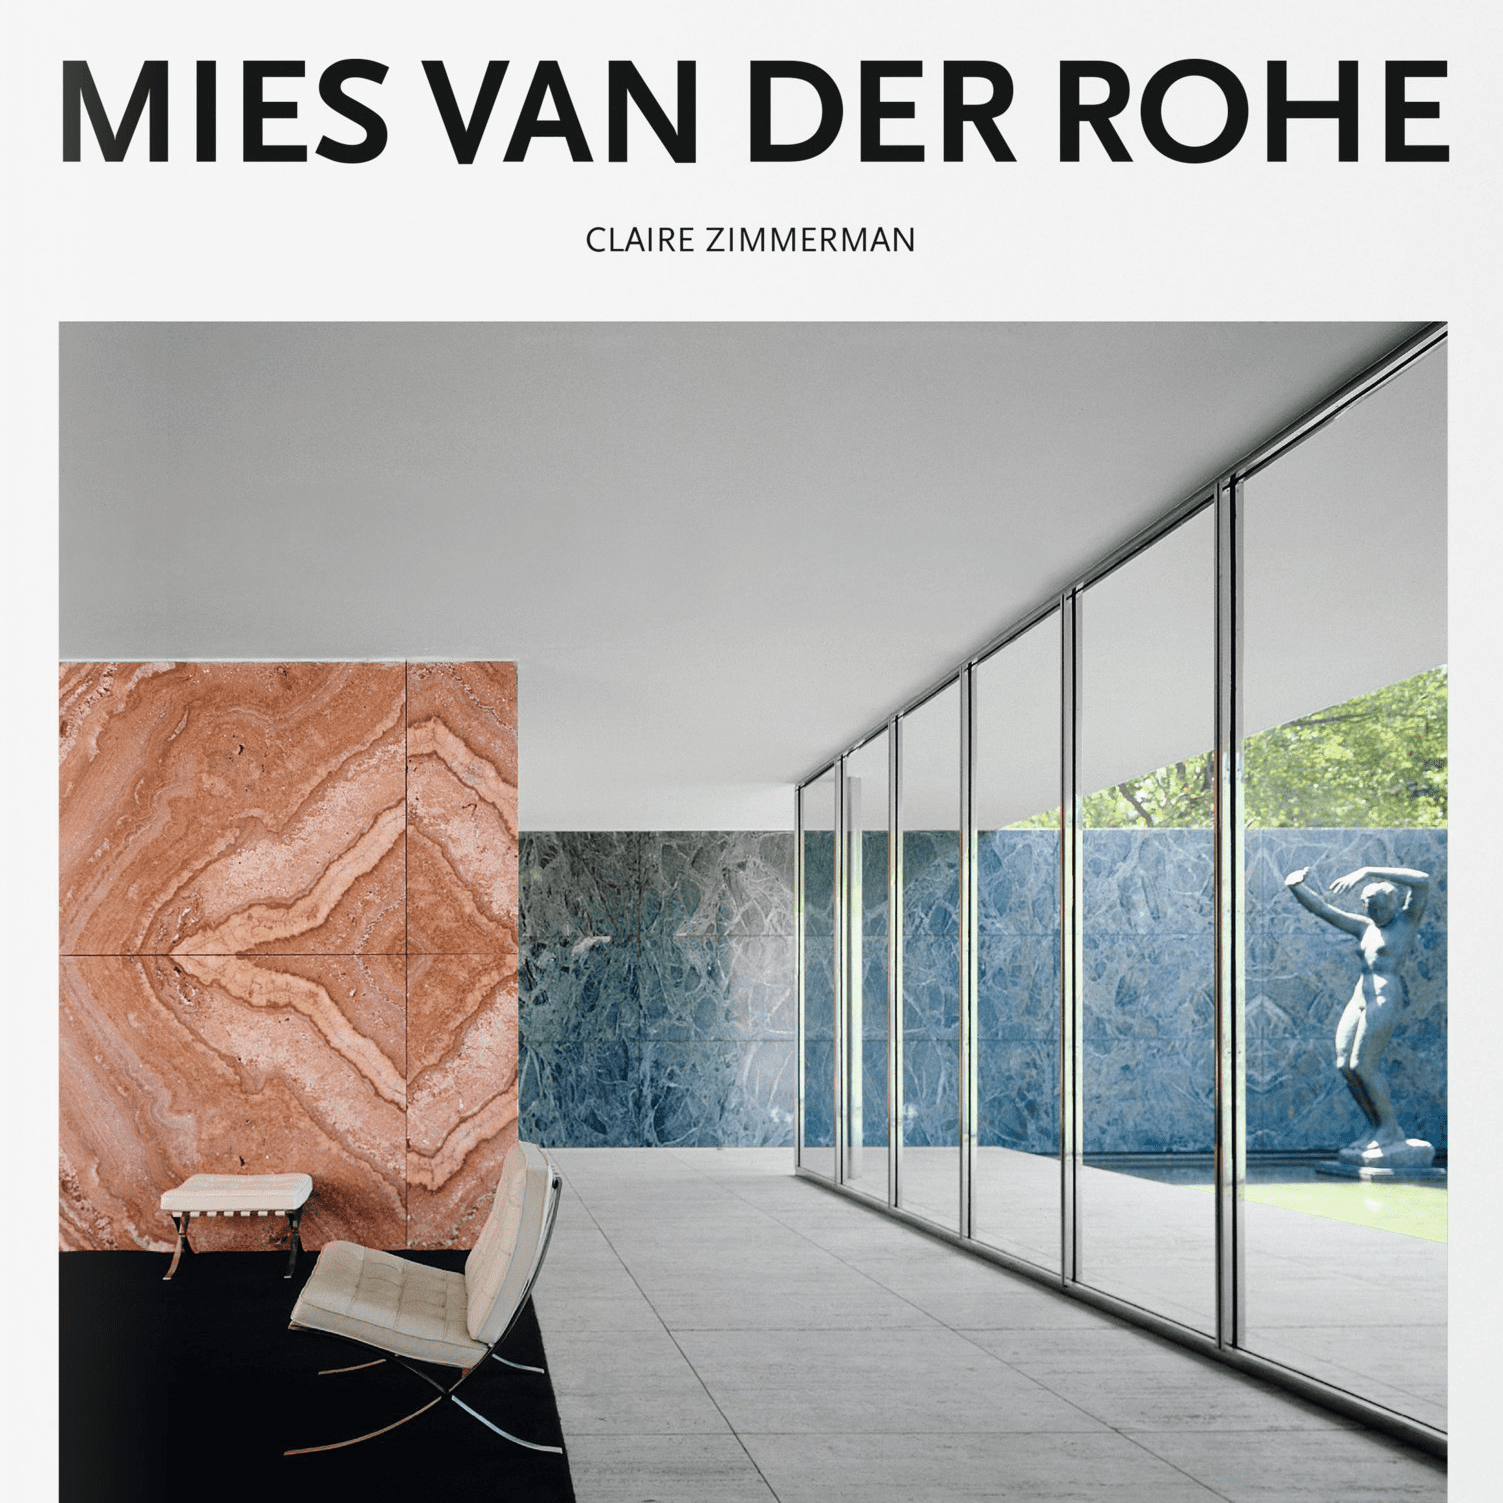 Изображение Mies van der Rohe's projects from 1906 to 1967